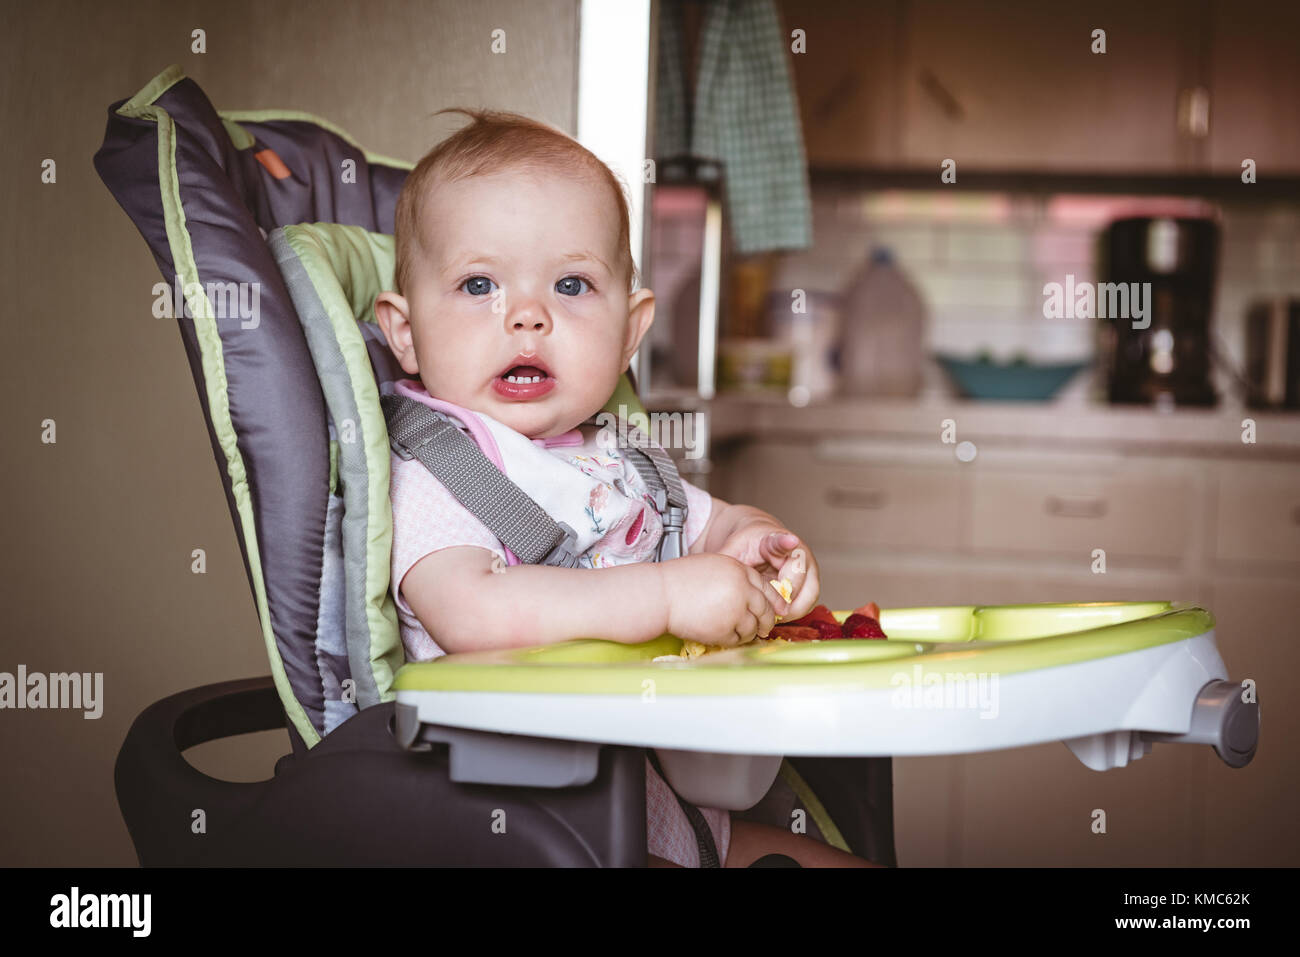 Cute baby sitting in high chair Stock Photo